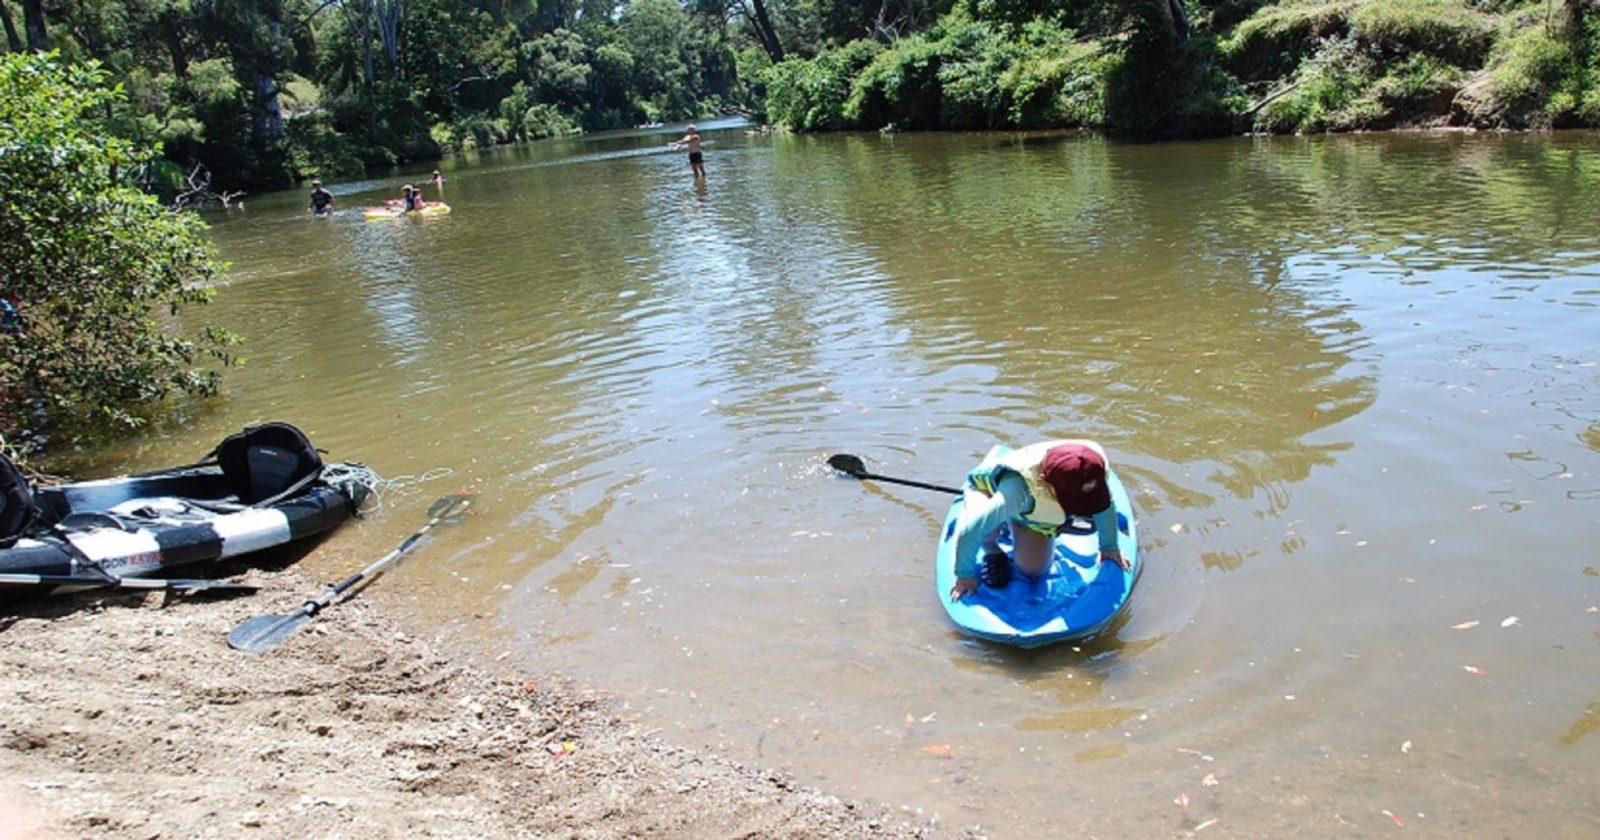 A number of people playing in the water at Neurum Creek, near the campgrounds